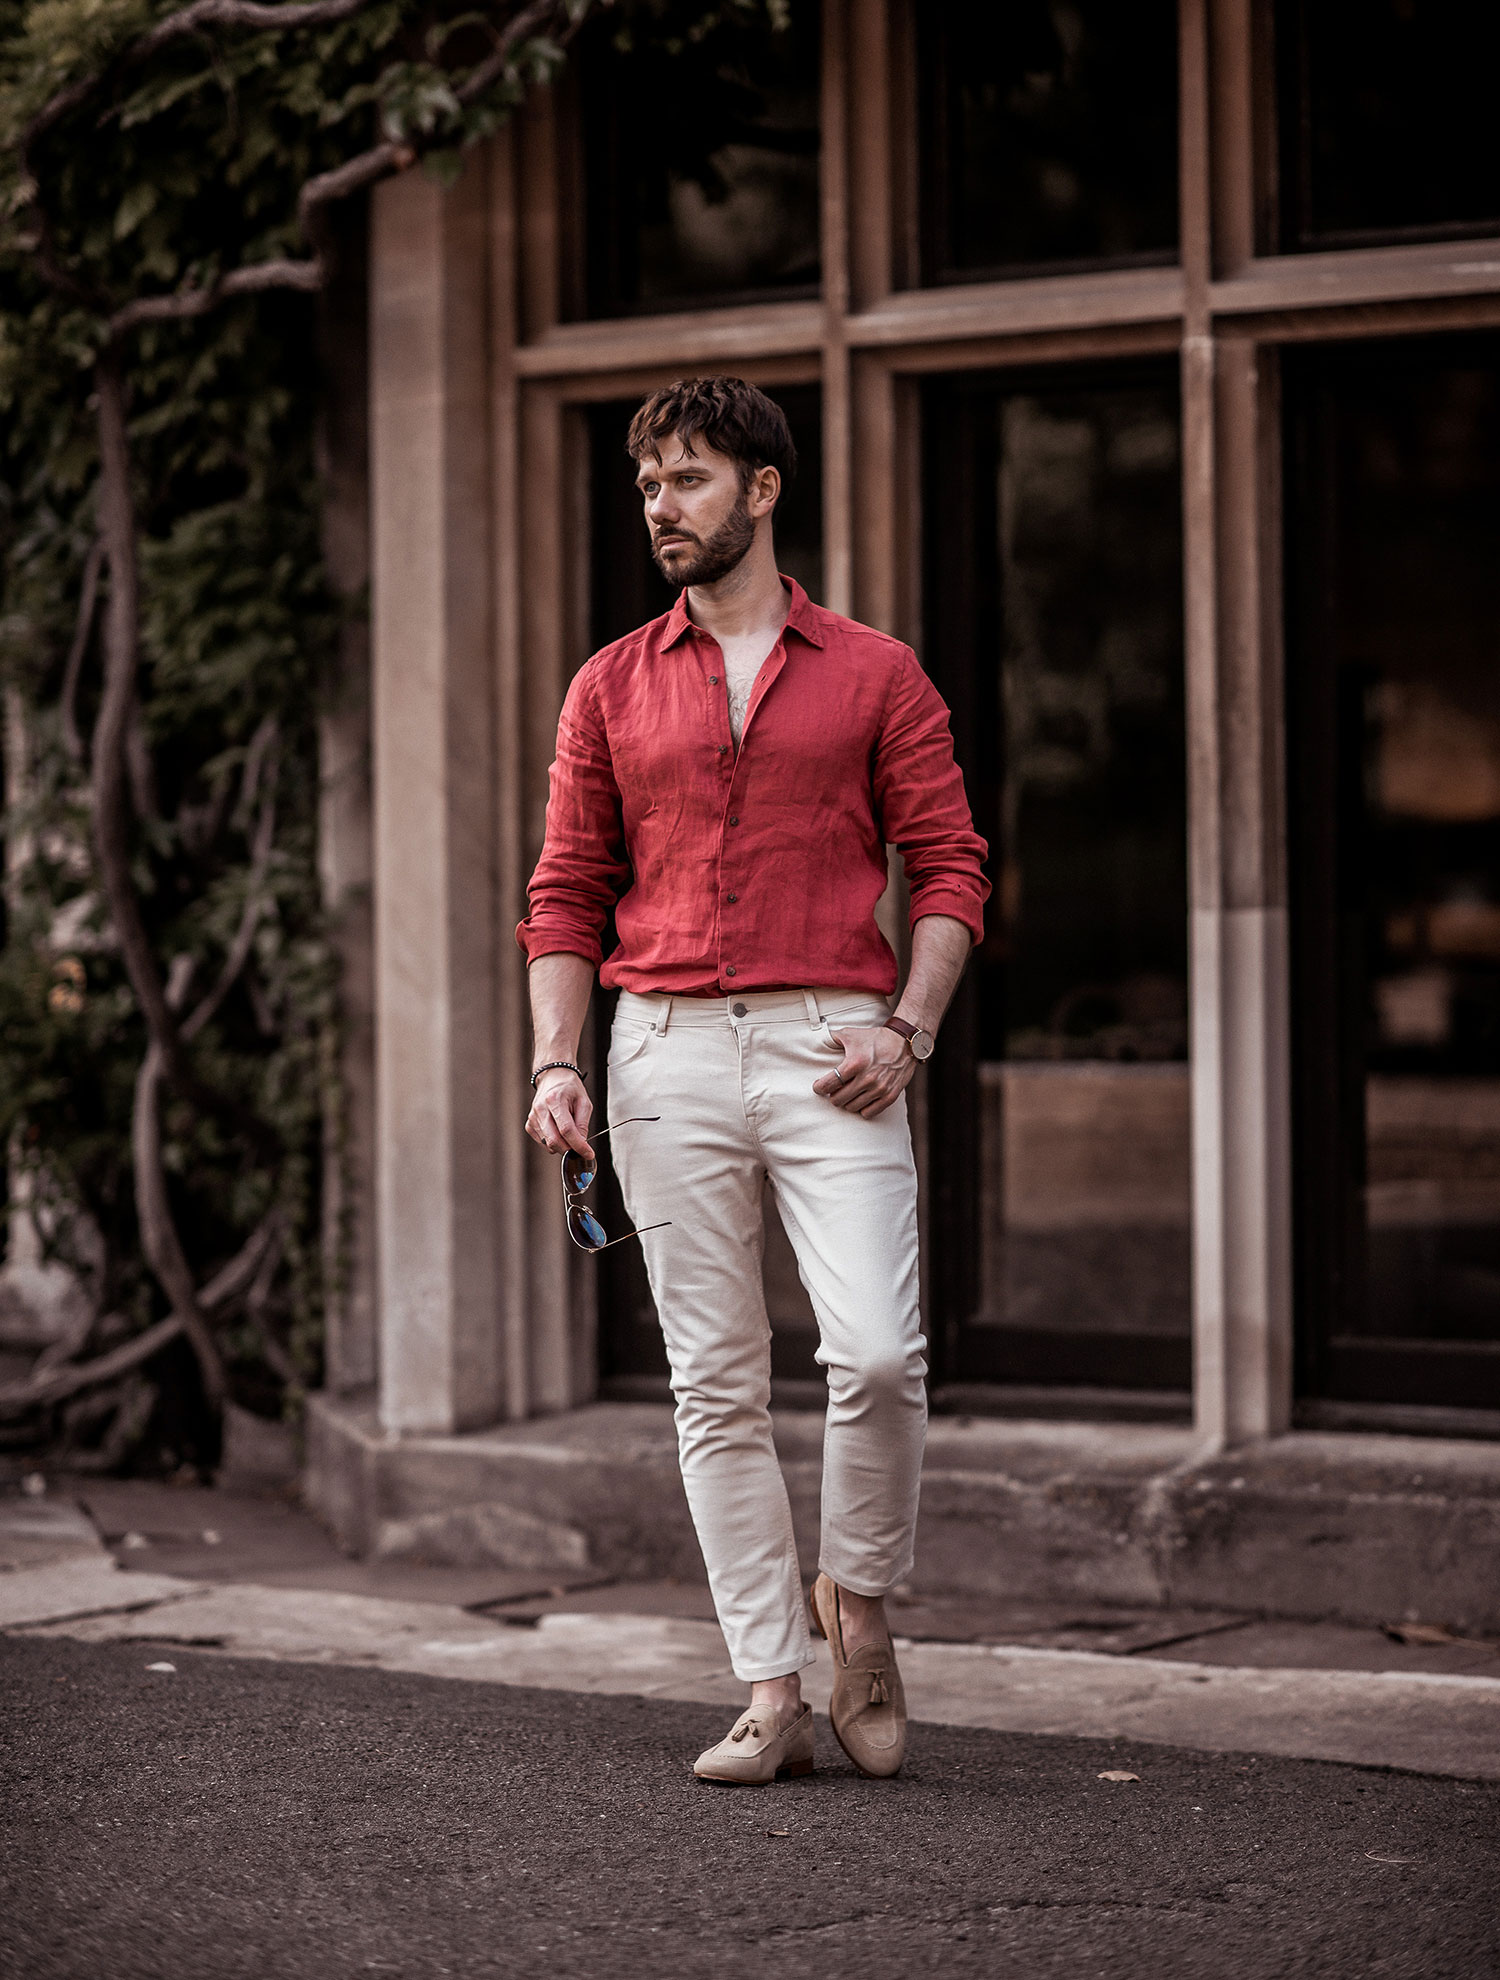 Red Linen Shirt With Ecru Skinny Jeans Outfit - Your Average Guy